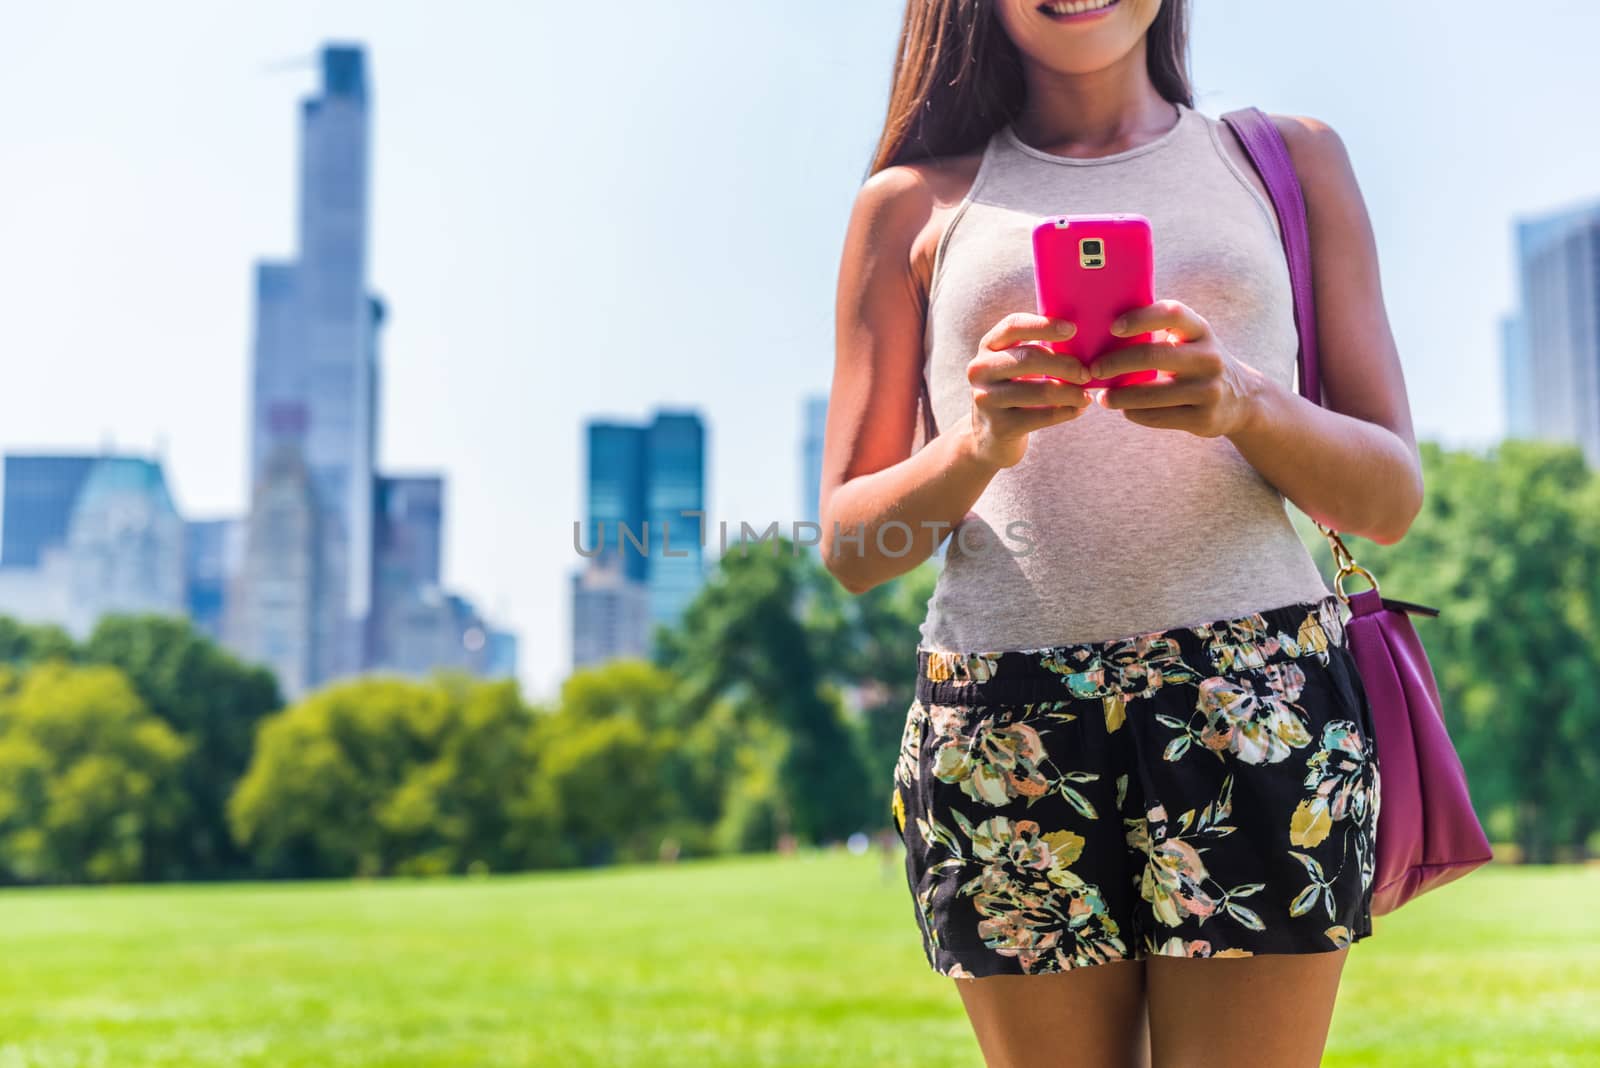 Urban modern NYC city lifestyle smartphone woman. Person texting sms on mobile phone in Central park Meadow, New York. Summer vacation travel.